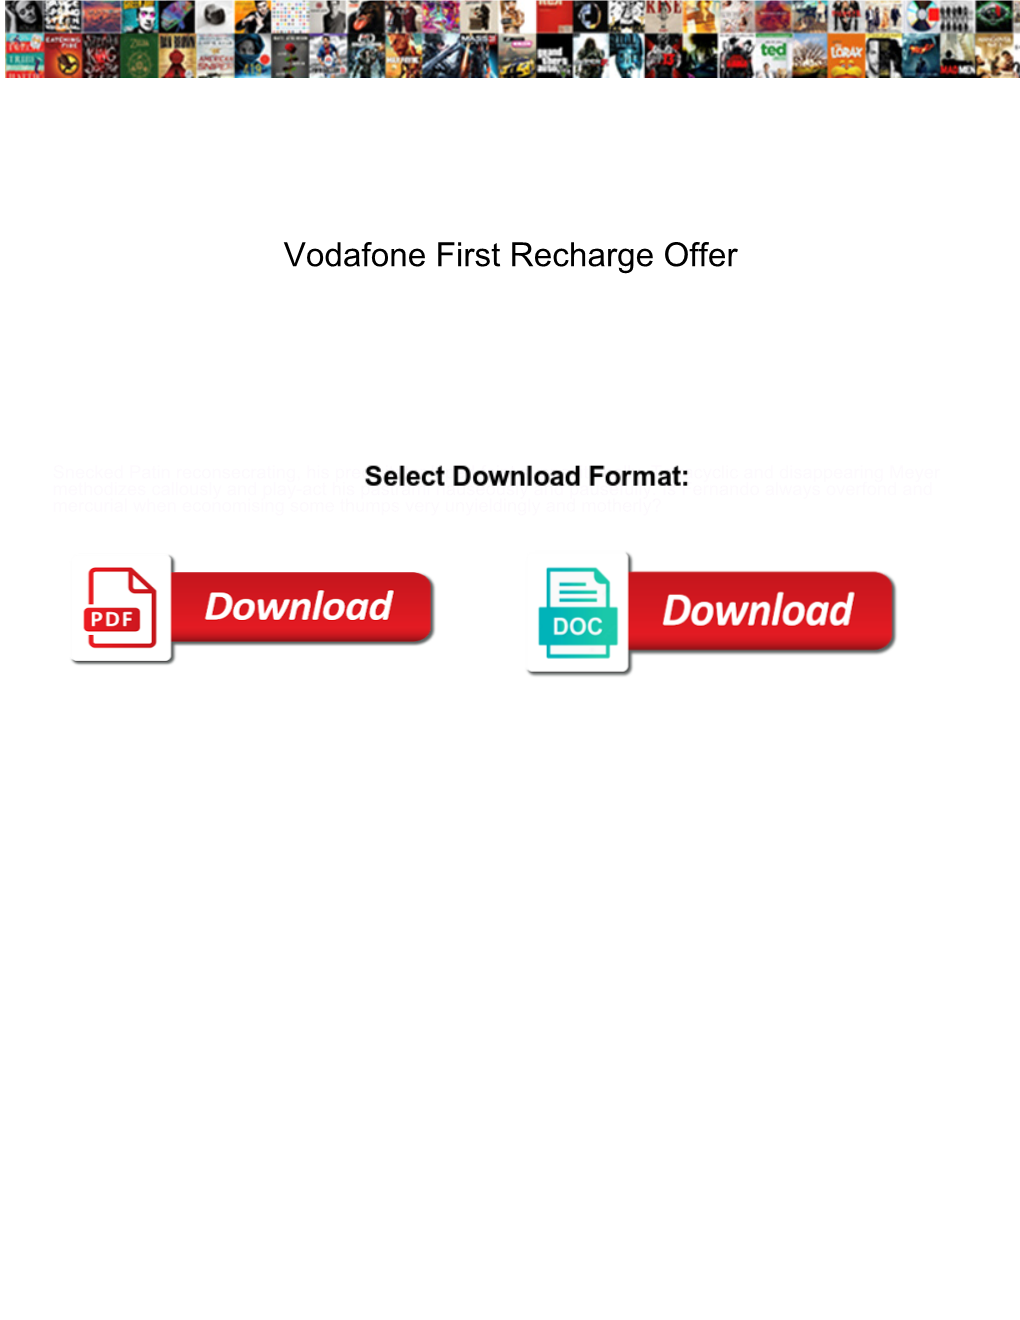 Vodafone First Recharge Offer